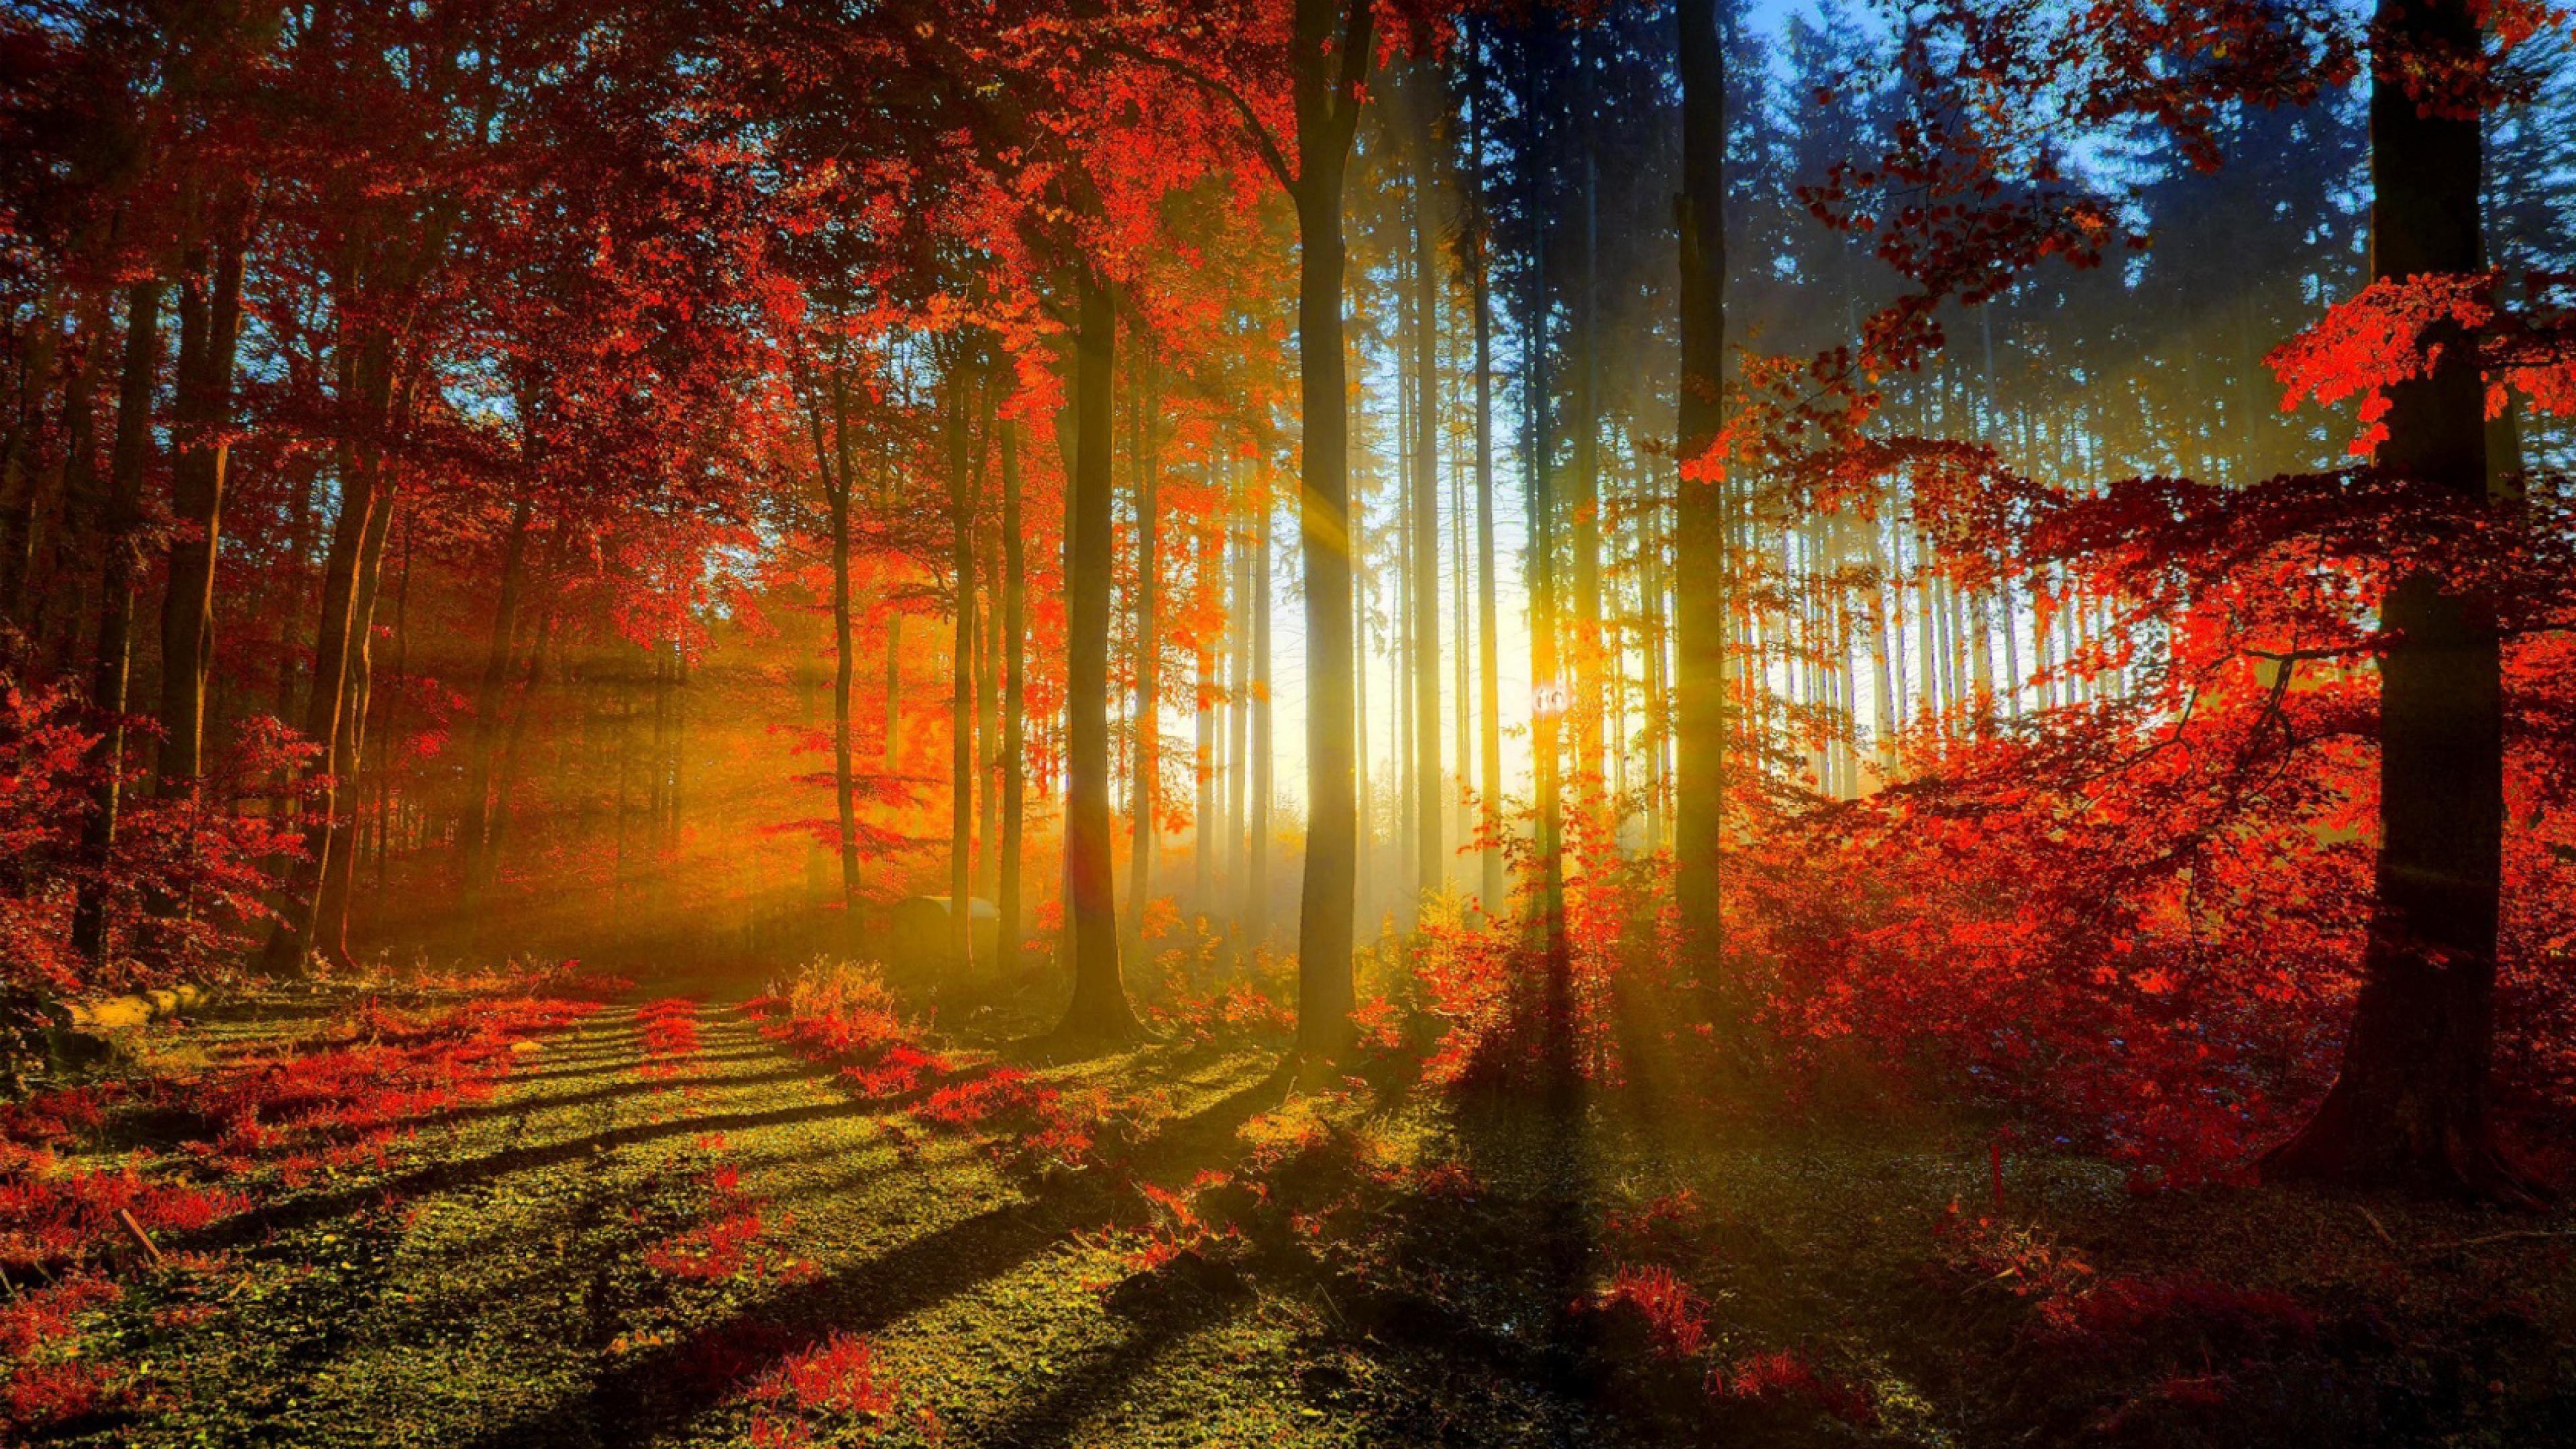 Autumn Red Forest Rays Ultra Hd Wallpaper 3840x2160 : Wallpapers13.com